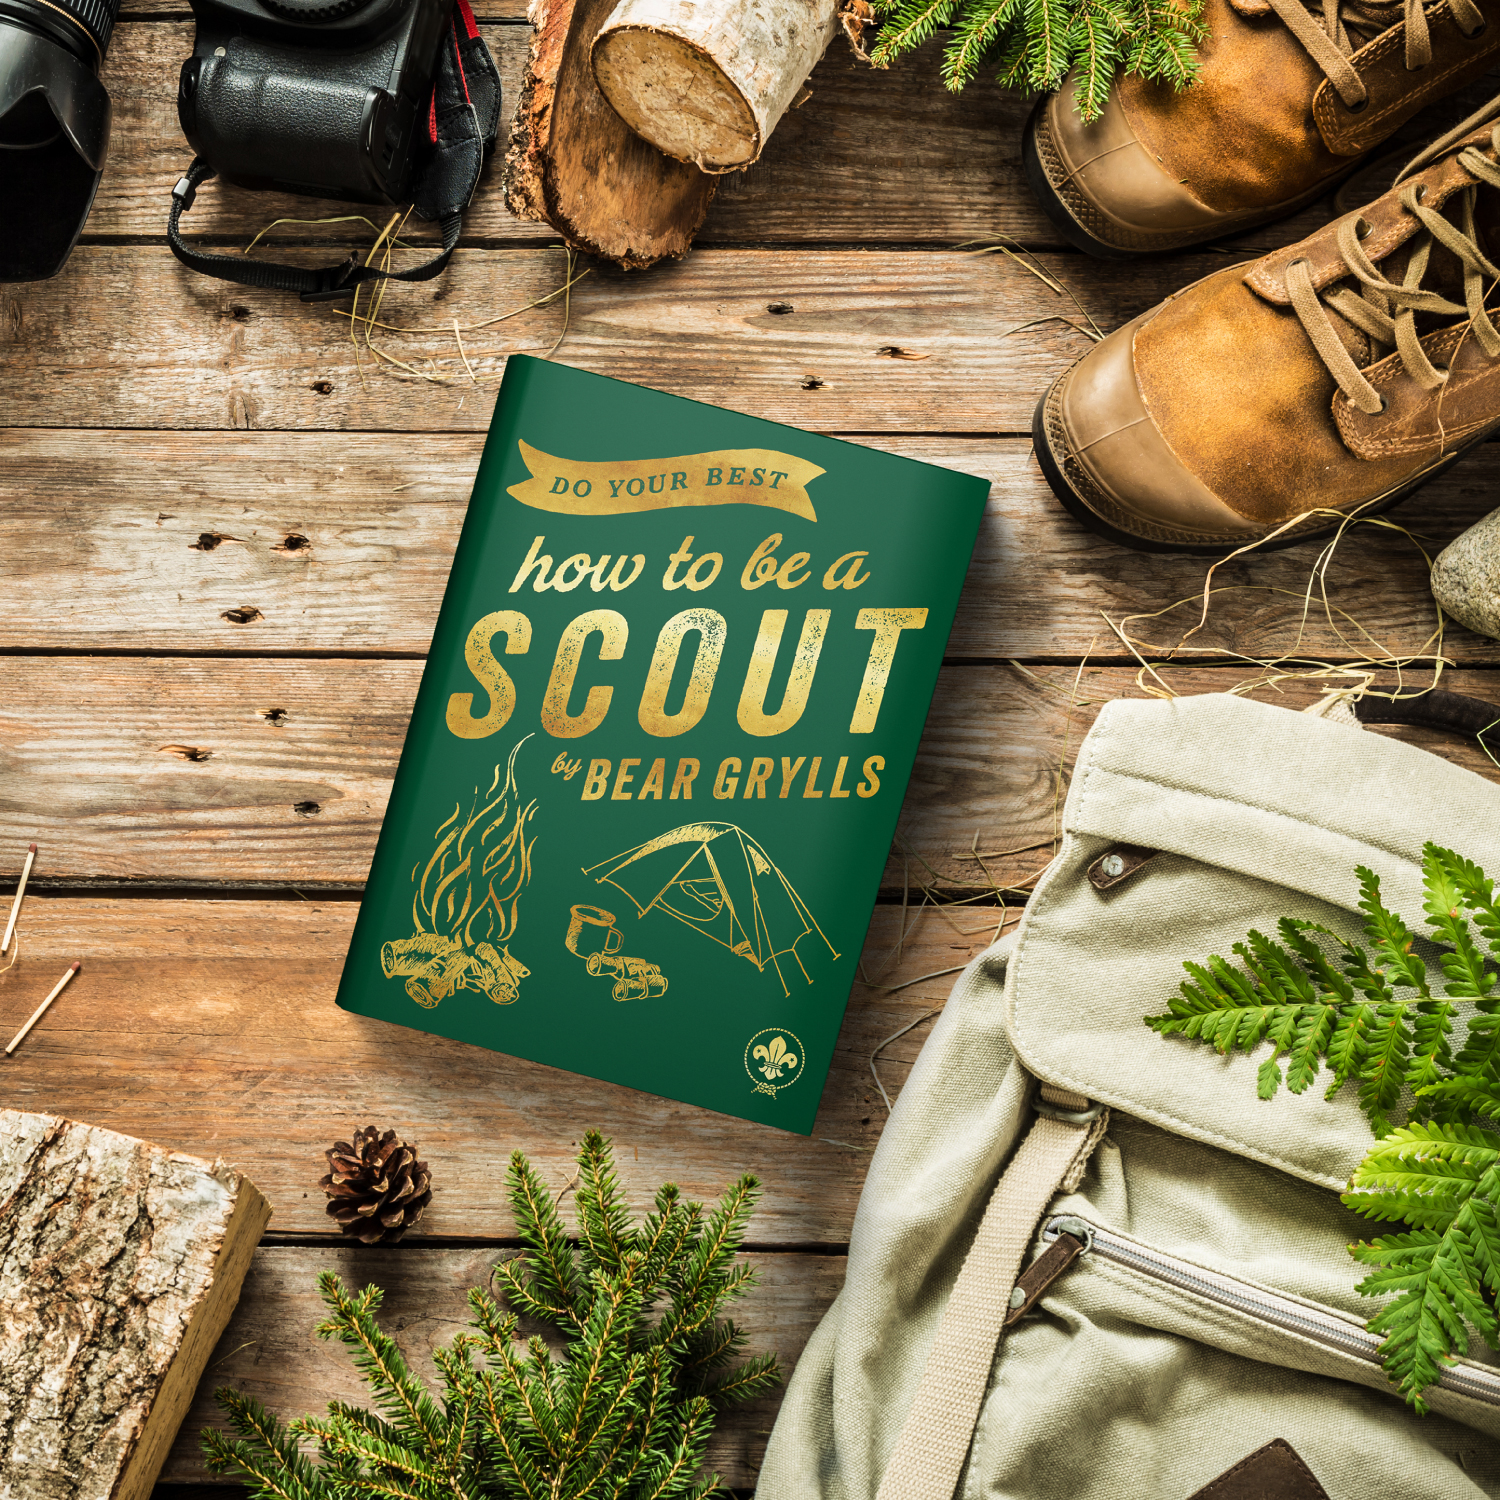 The image shows Bear Grylls' latest book, Do Your Best: How to be a Scout. The book is laid on top of wooden planks and is surrounded by different outdoor items, including brown boots, a backpack, leaves, and a pine cone. 